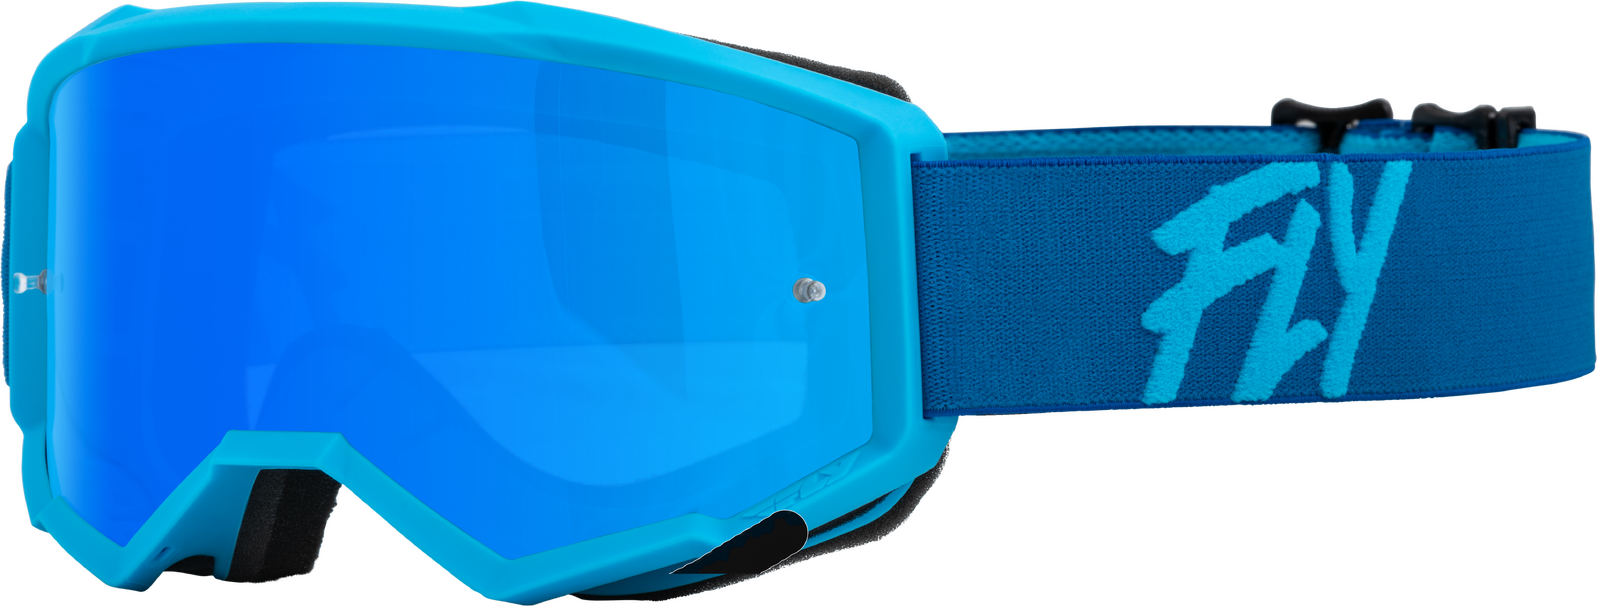 Fly Zone Youth Sky Blue Mirror/Smoke Lens Goggles - Blue